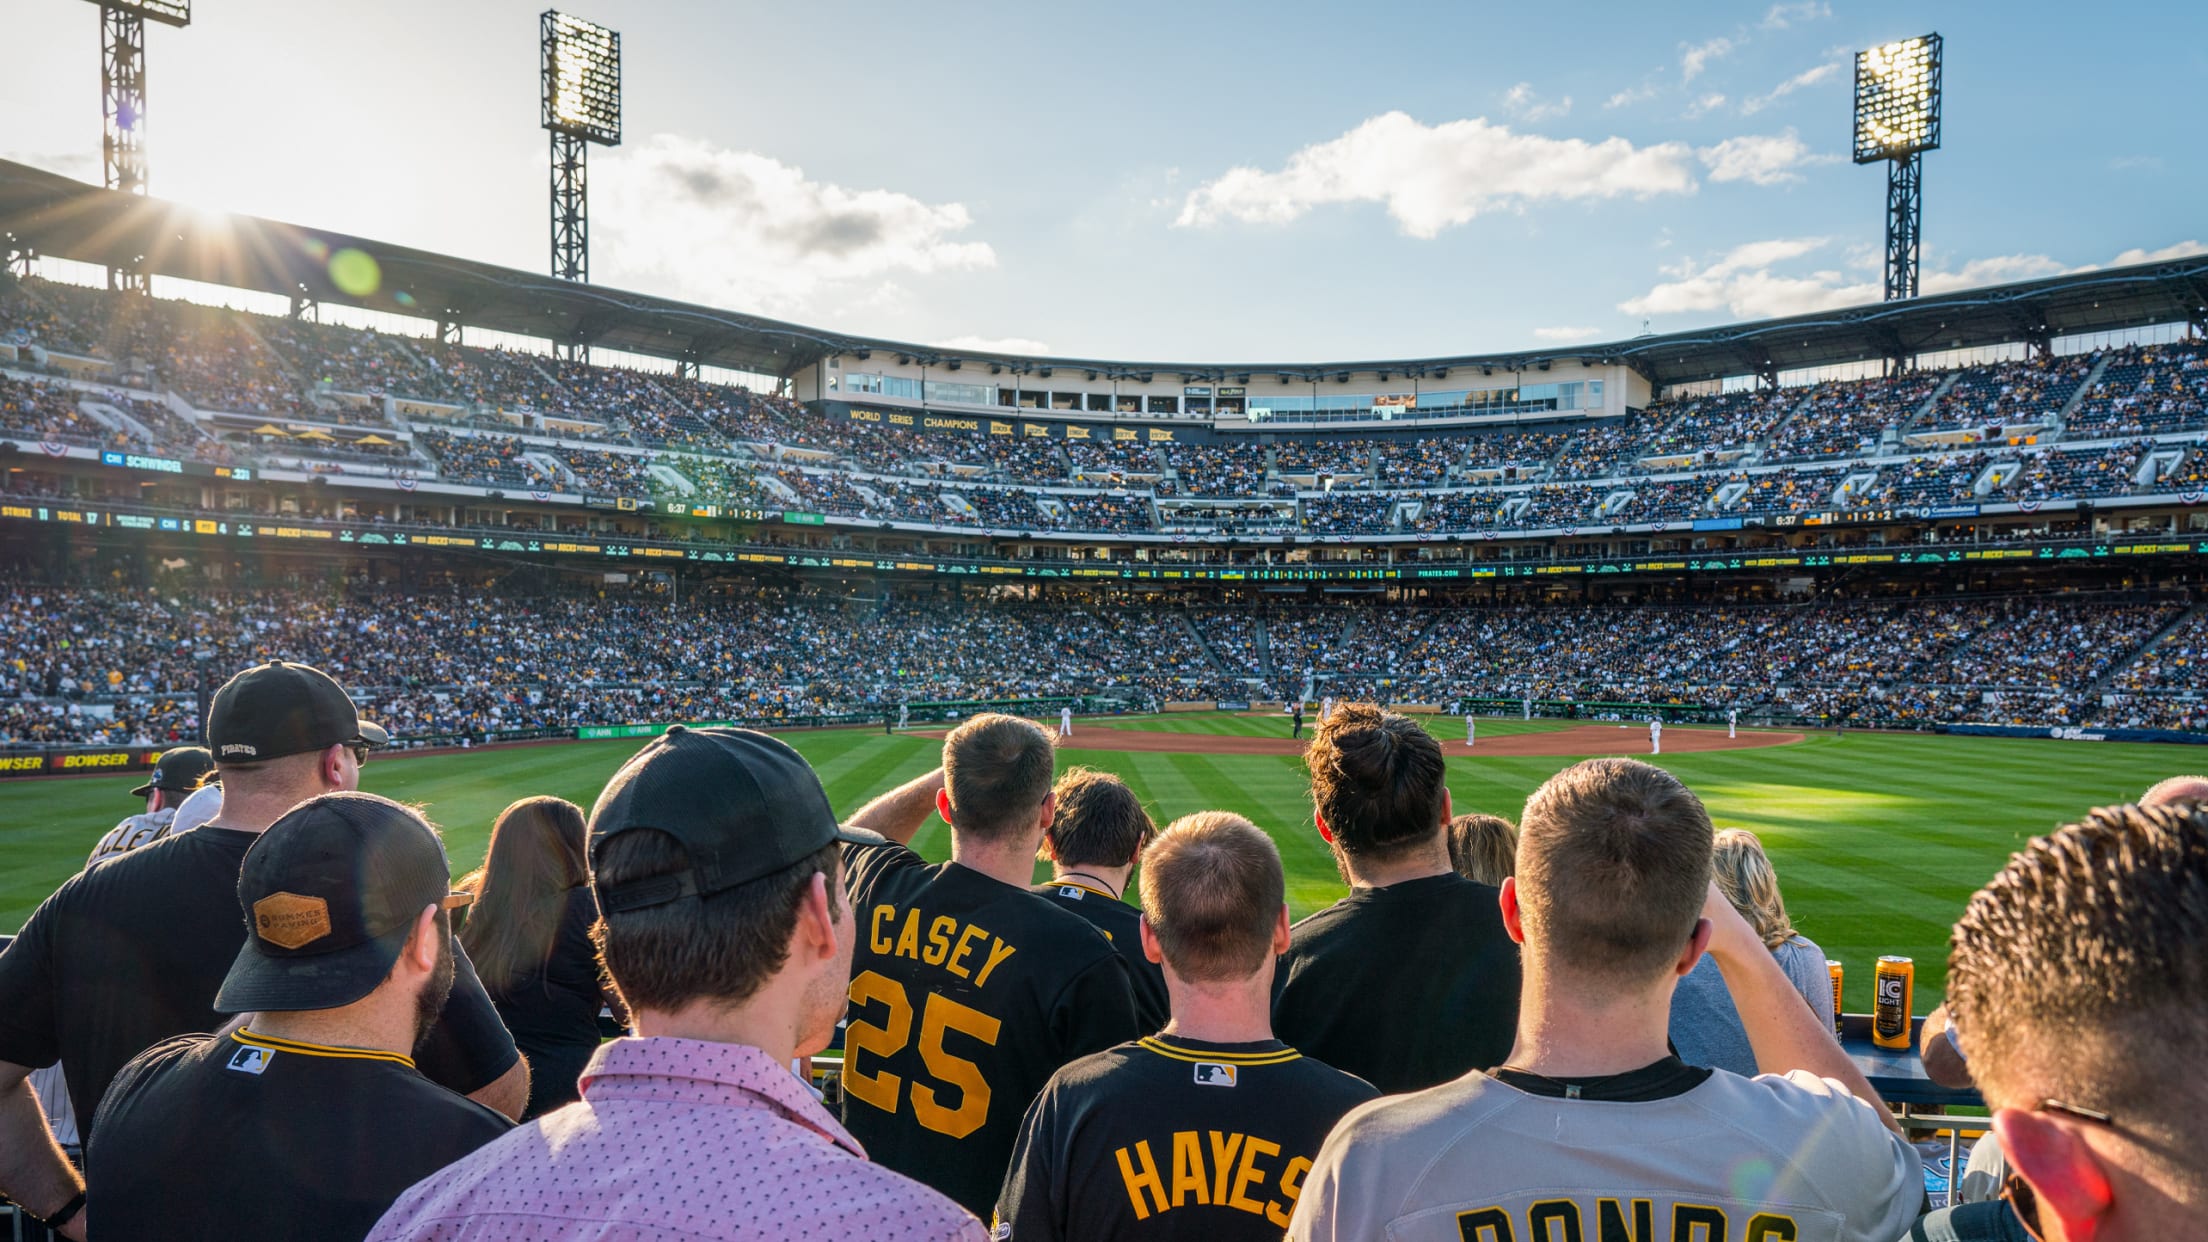 PNC Park: America's Most Beautiful Park - Positively Pittsburgh